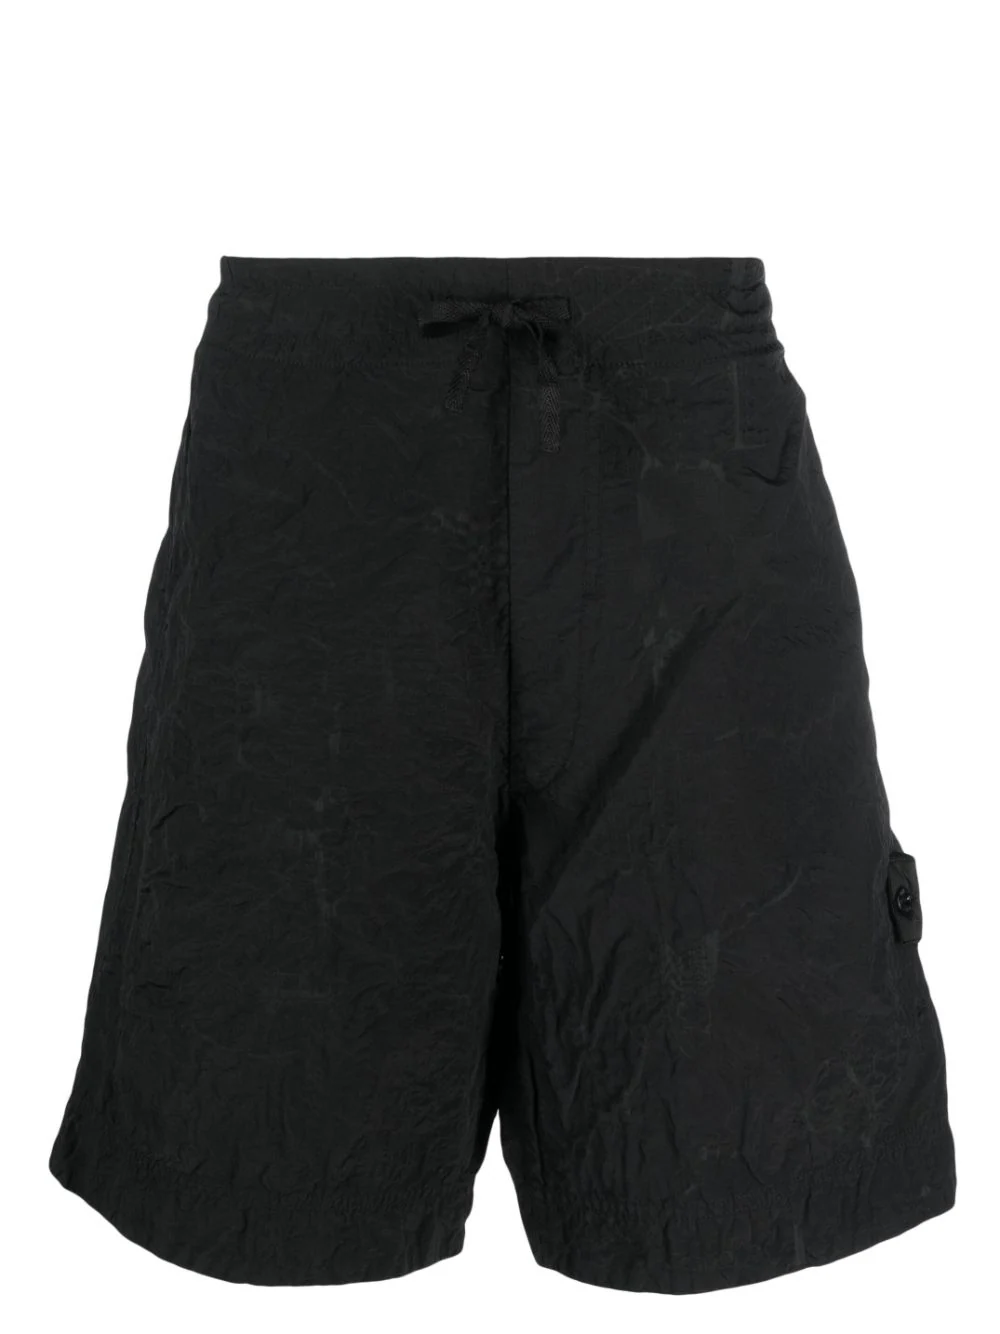 STONE ISLAND SHADOW PROJECT SWIMMING TRUNKS WITH DRAWSTRING AND COMPASS PATCH